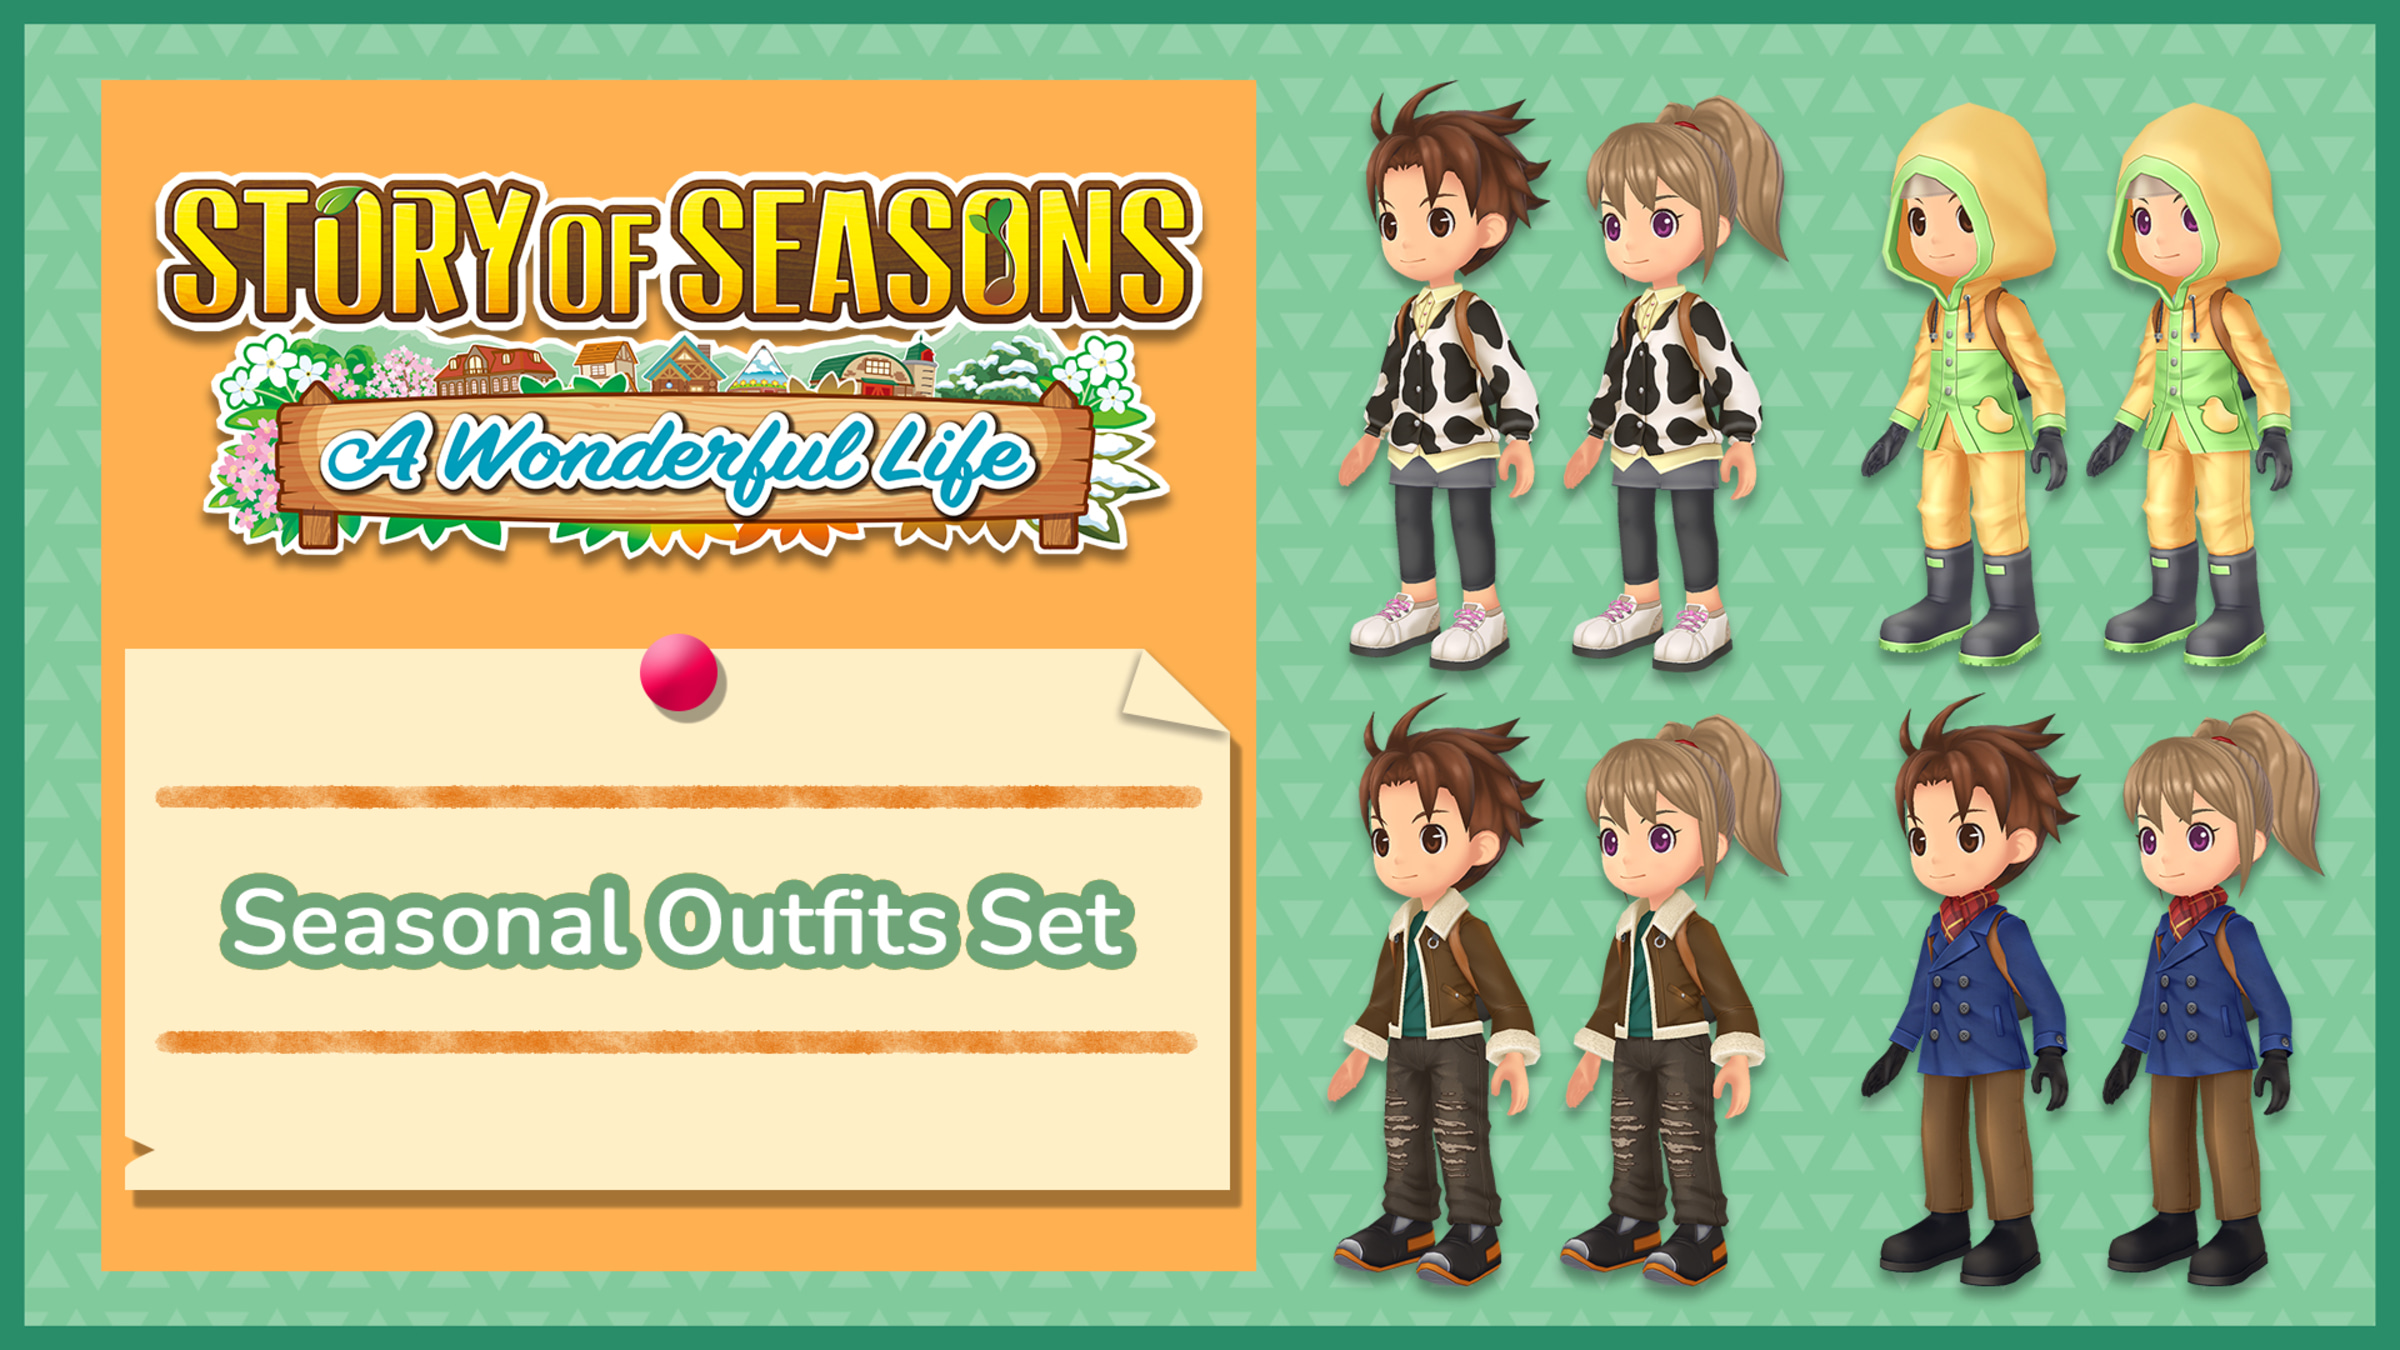 Seasonal Outfits Set for Nintendo Switch - Nintendo Official Site